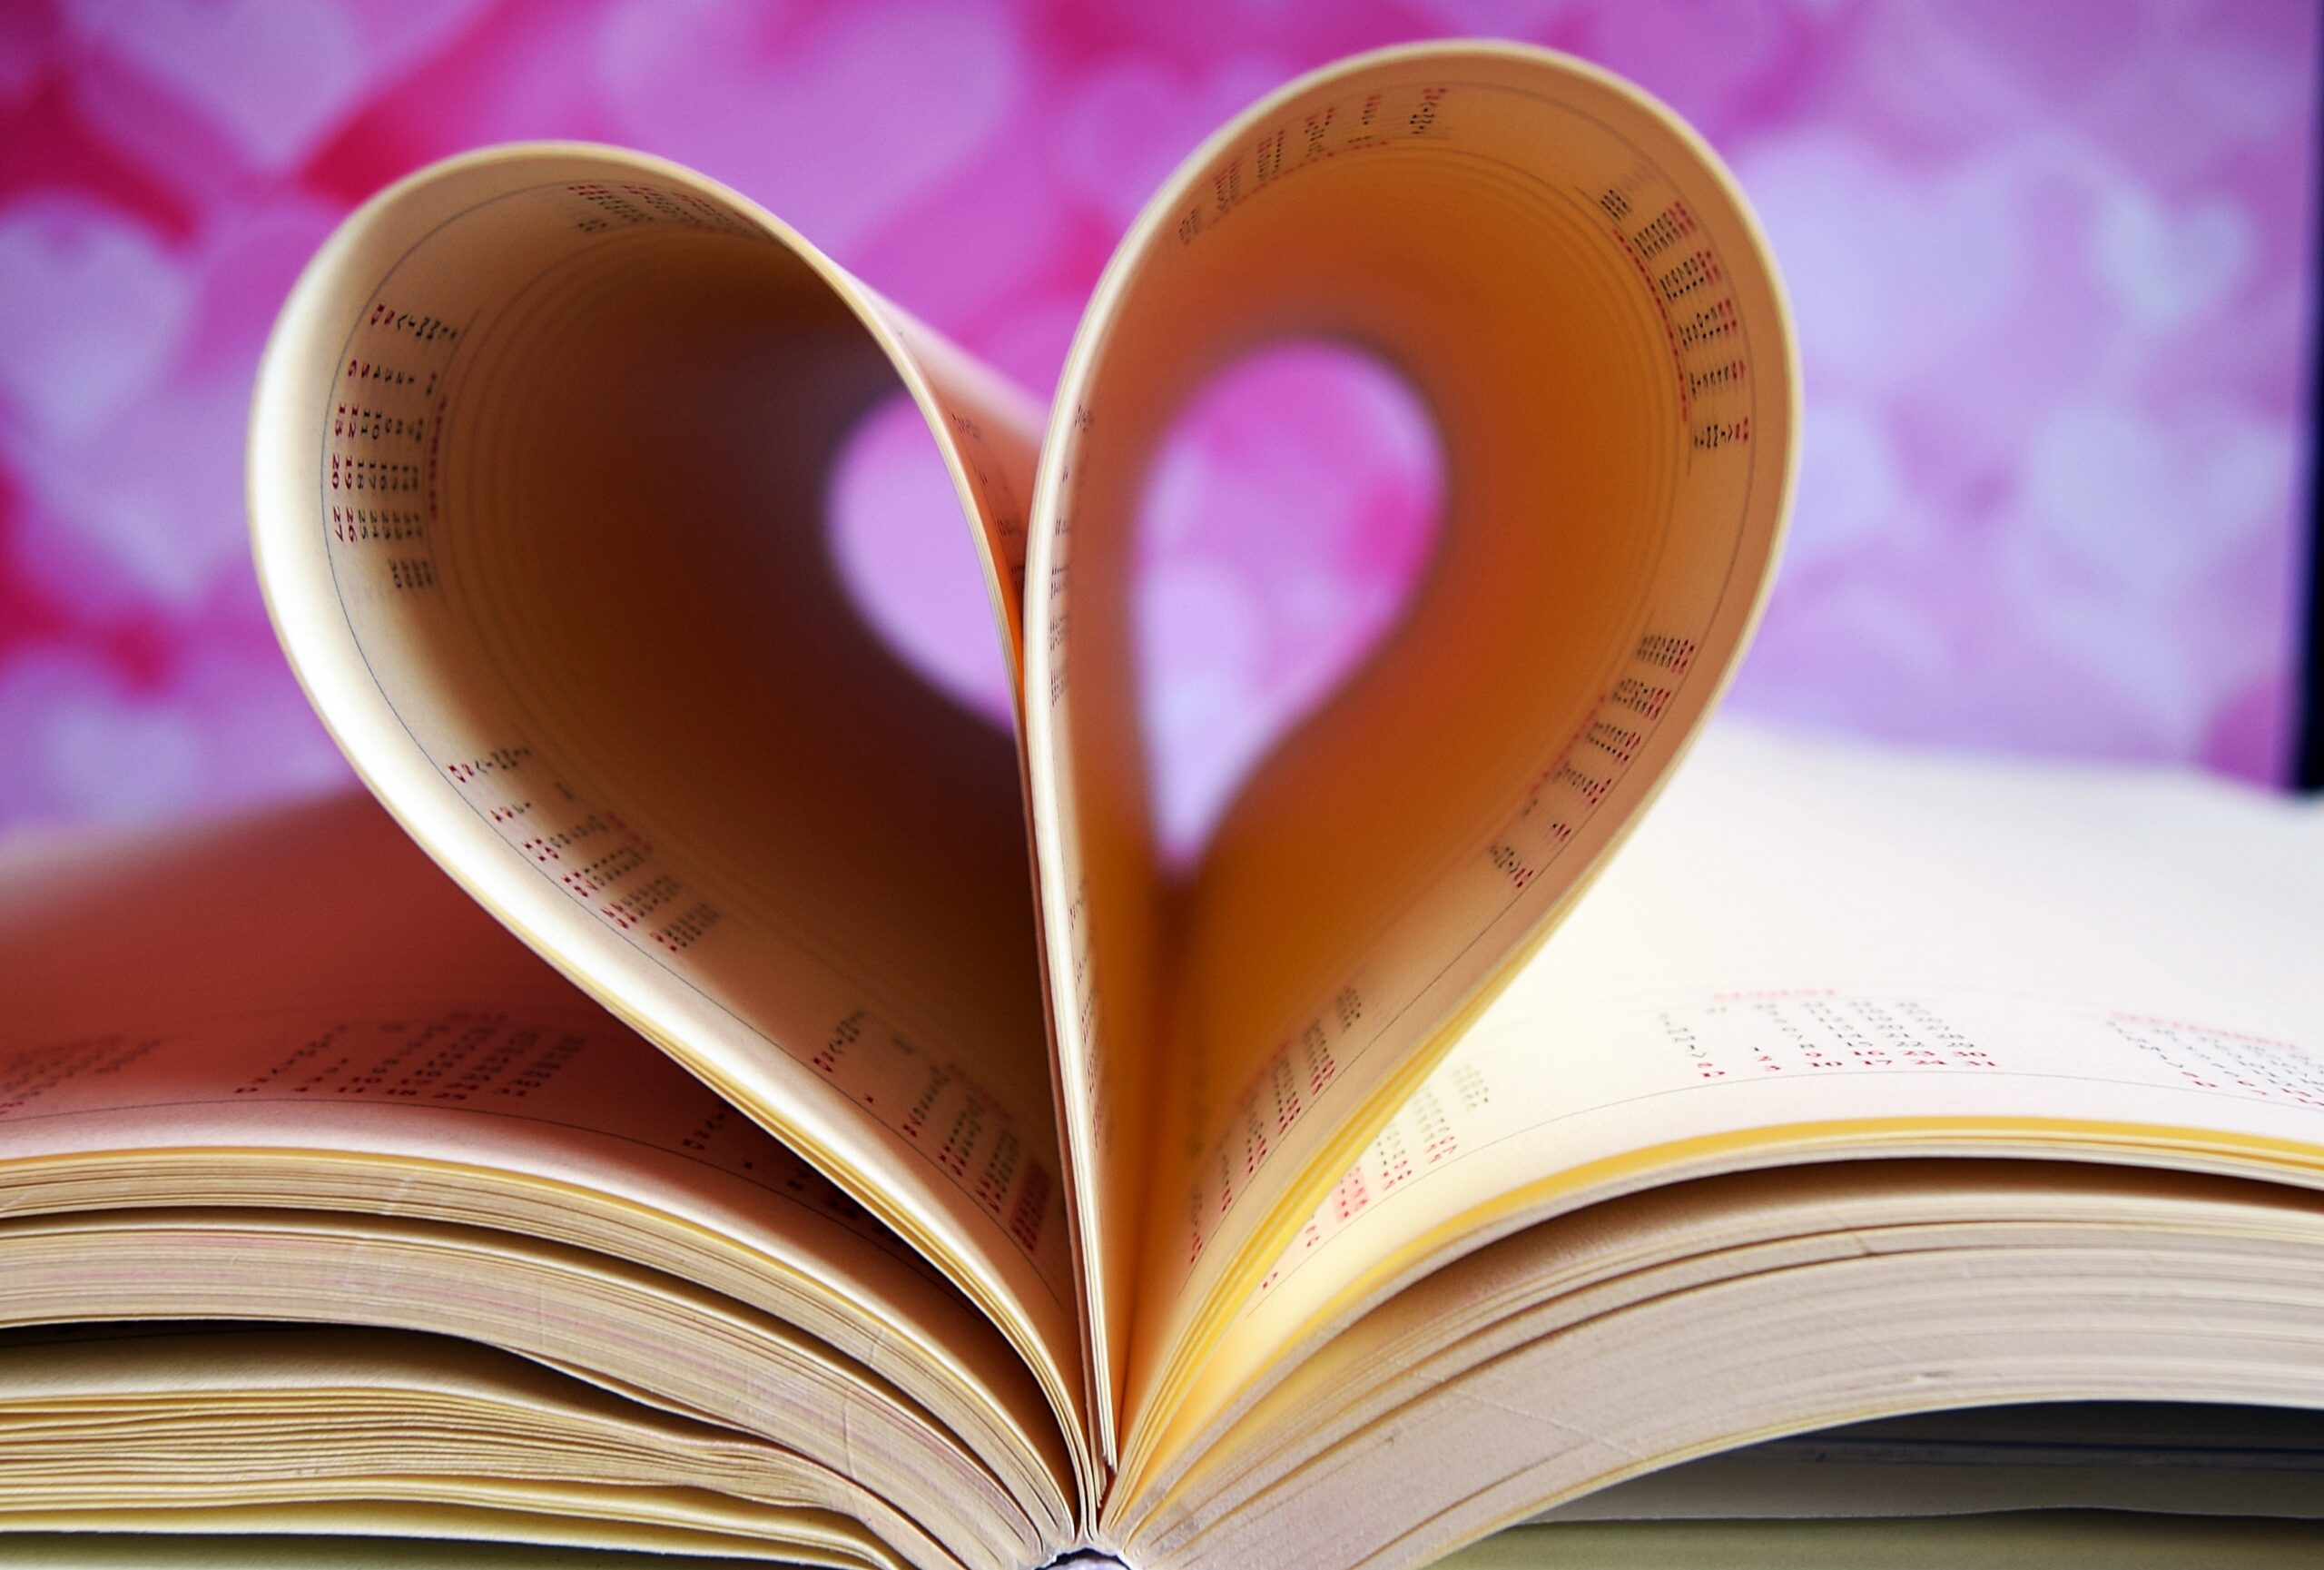 What Is the Most Popular Type of Romance Book